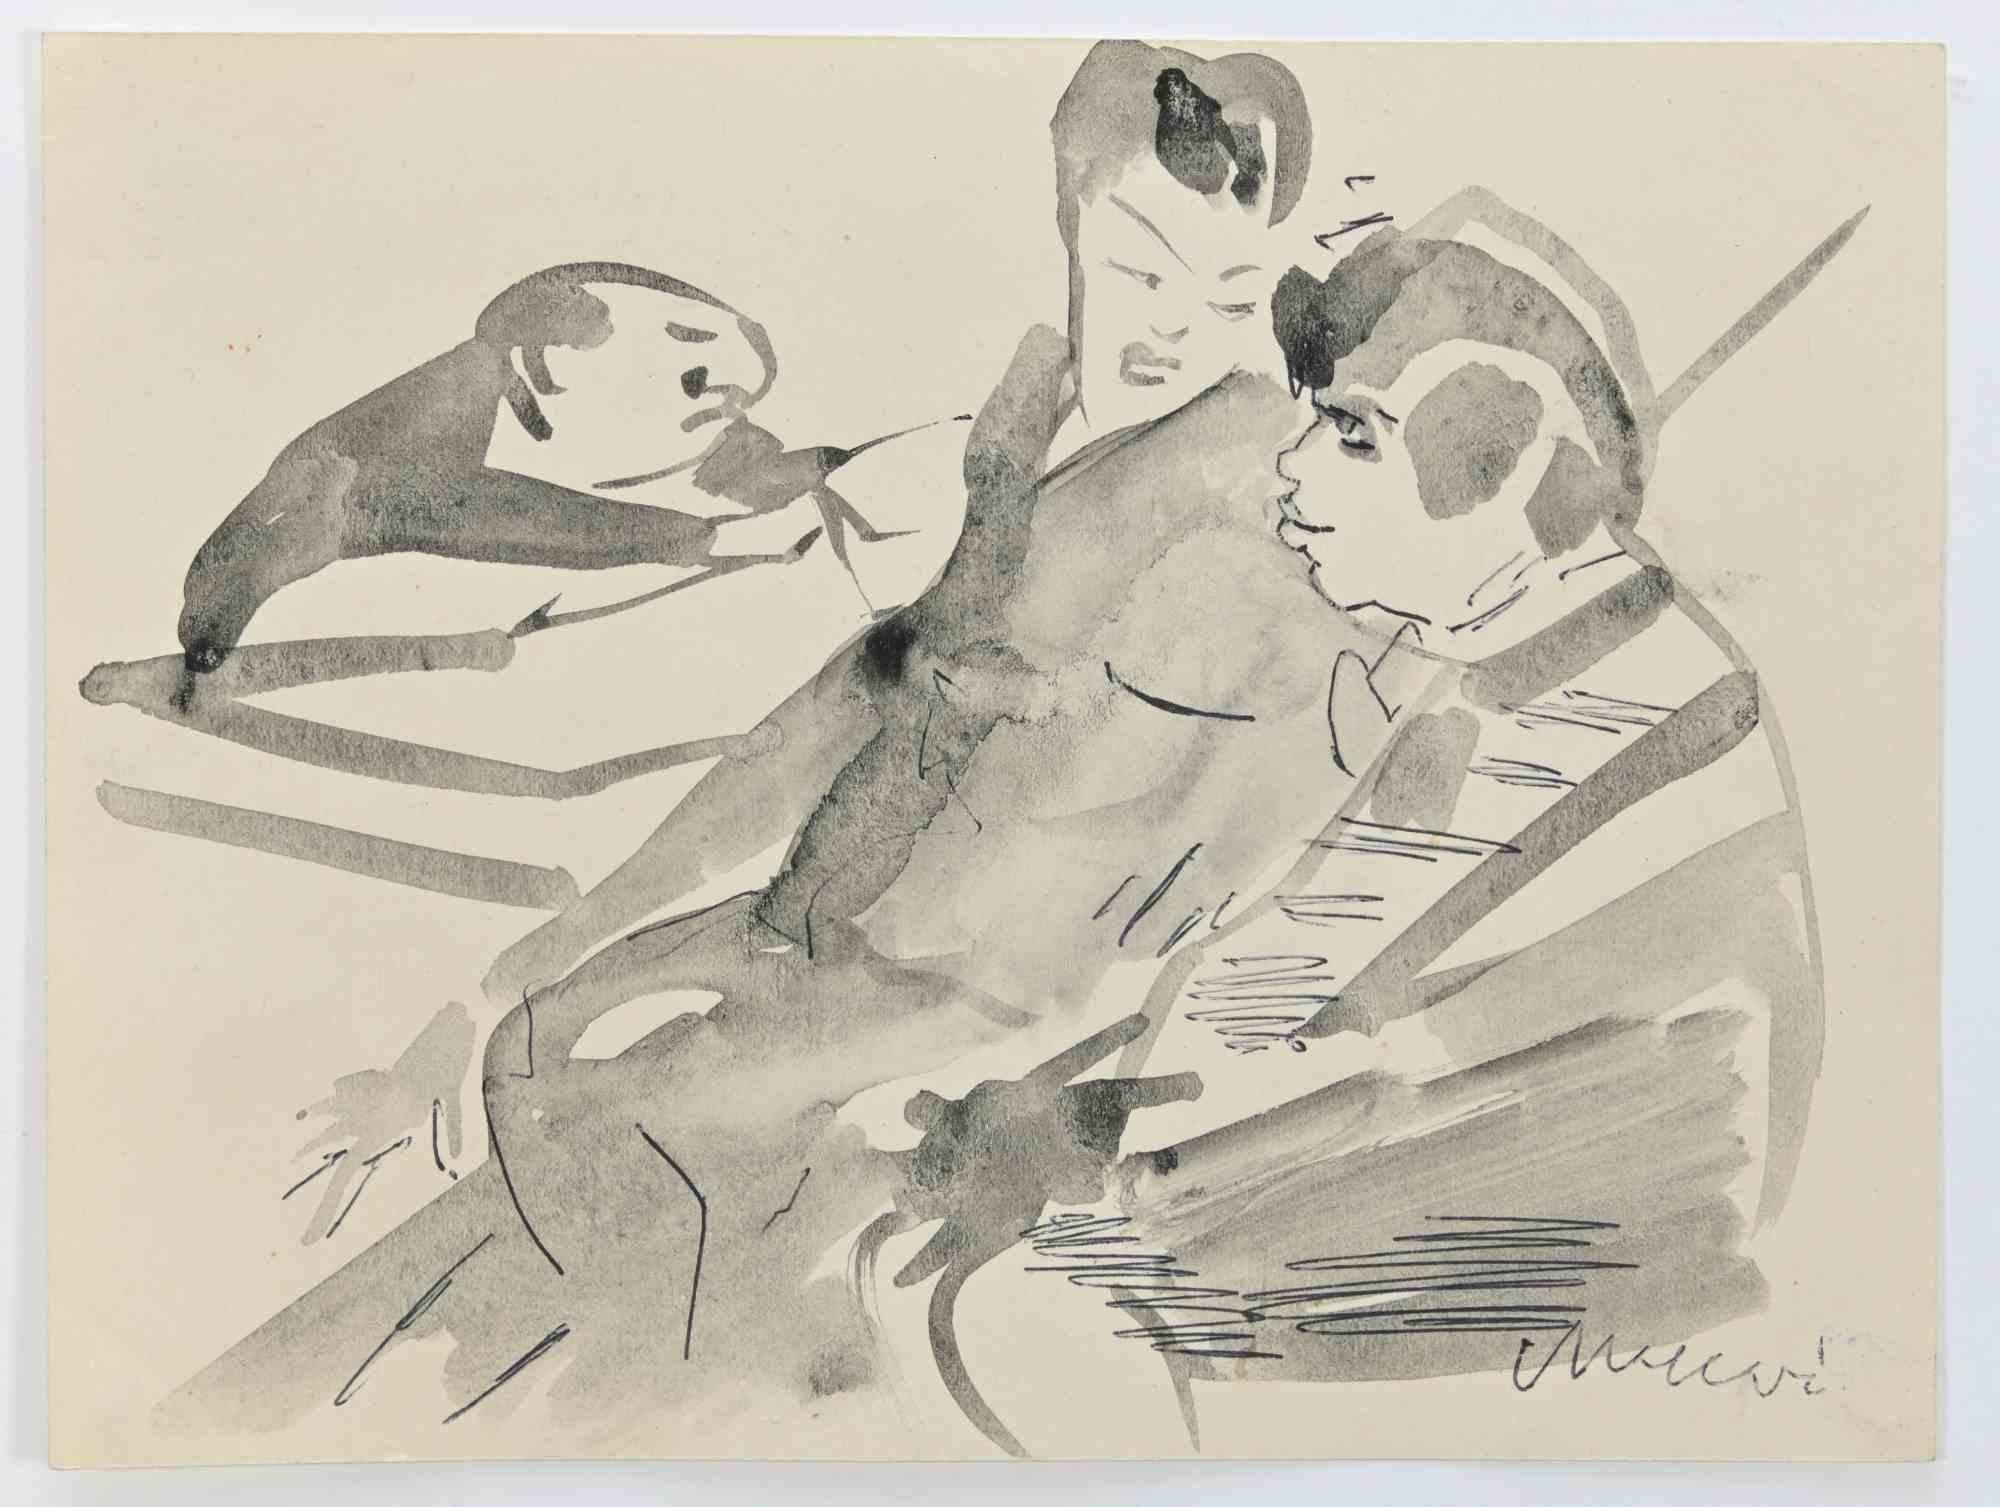 Tenderness is a pen and watercolor Drawing realized by Mino Maccari  (1924-1989) in 1960s.

Hand-signed on the lower margin.

Good condition.

Mino Maccari (Siena, 1924-Rome, June 16, 1989) was an Italian writer, painter, engraver and journalist,